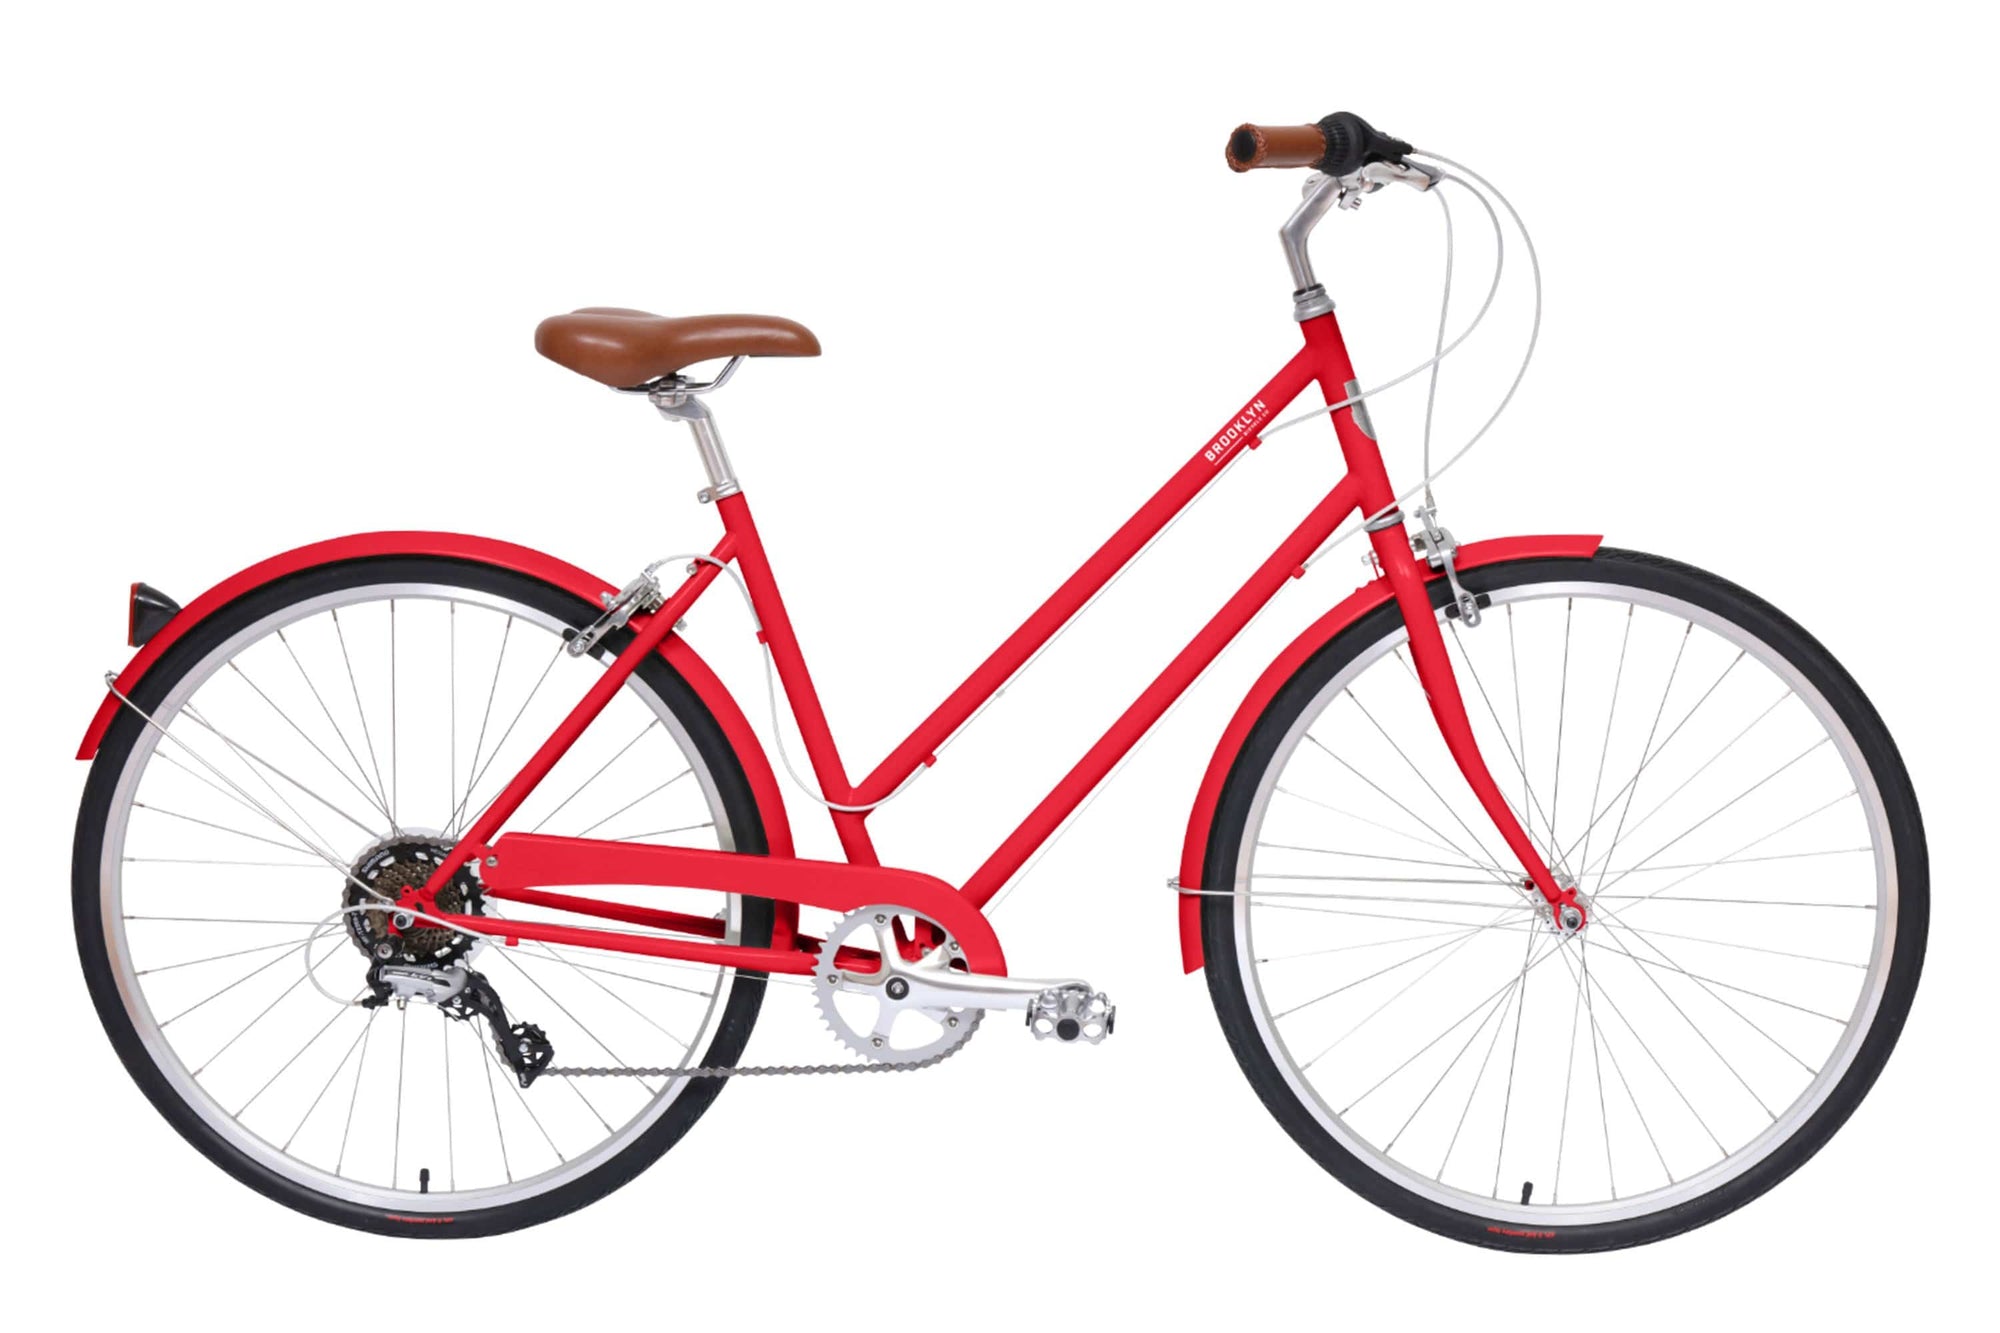 Franklin 8 Speed 8 Speed Step Through Bicycle | Franklin Eight City Cruiser  Gloss Black / S/M 8D-FRA-GB-M